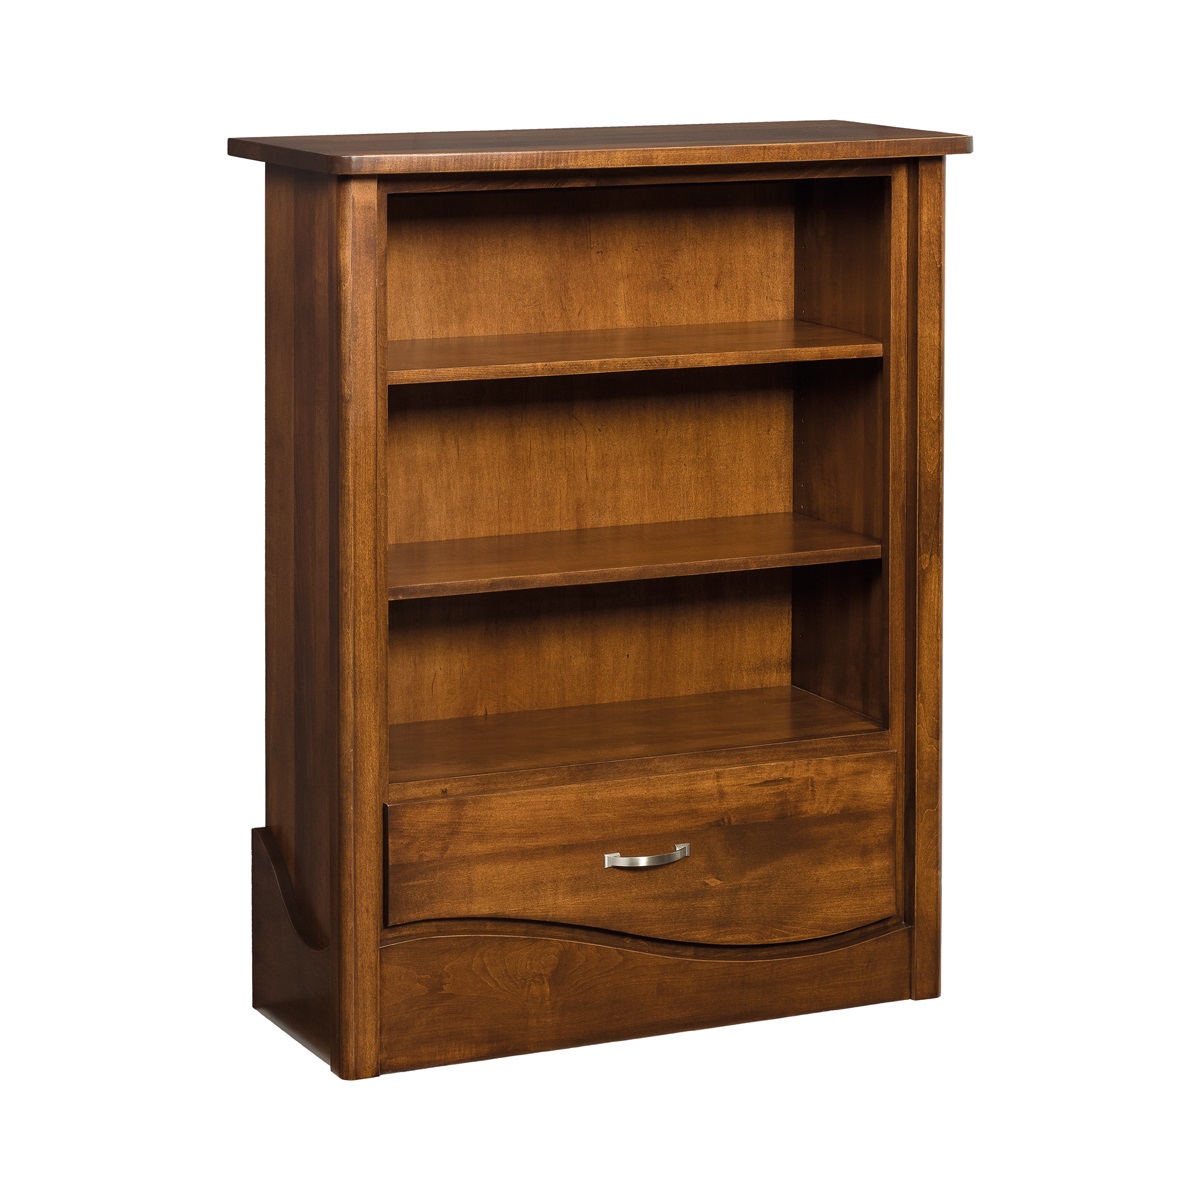 Tanessah 48" Bookcase Image